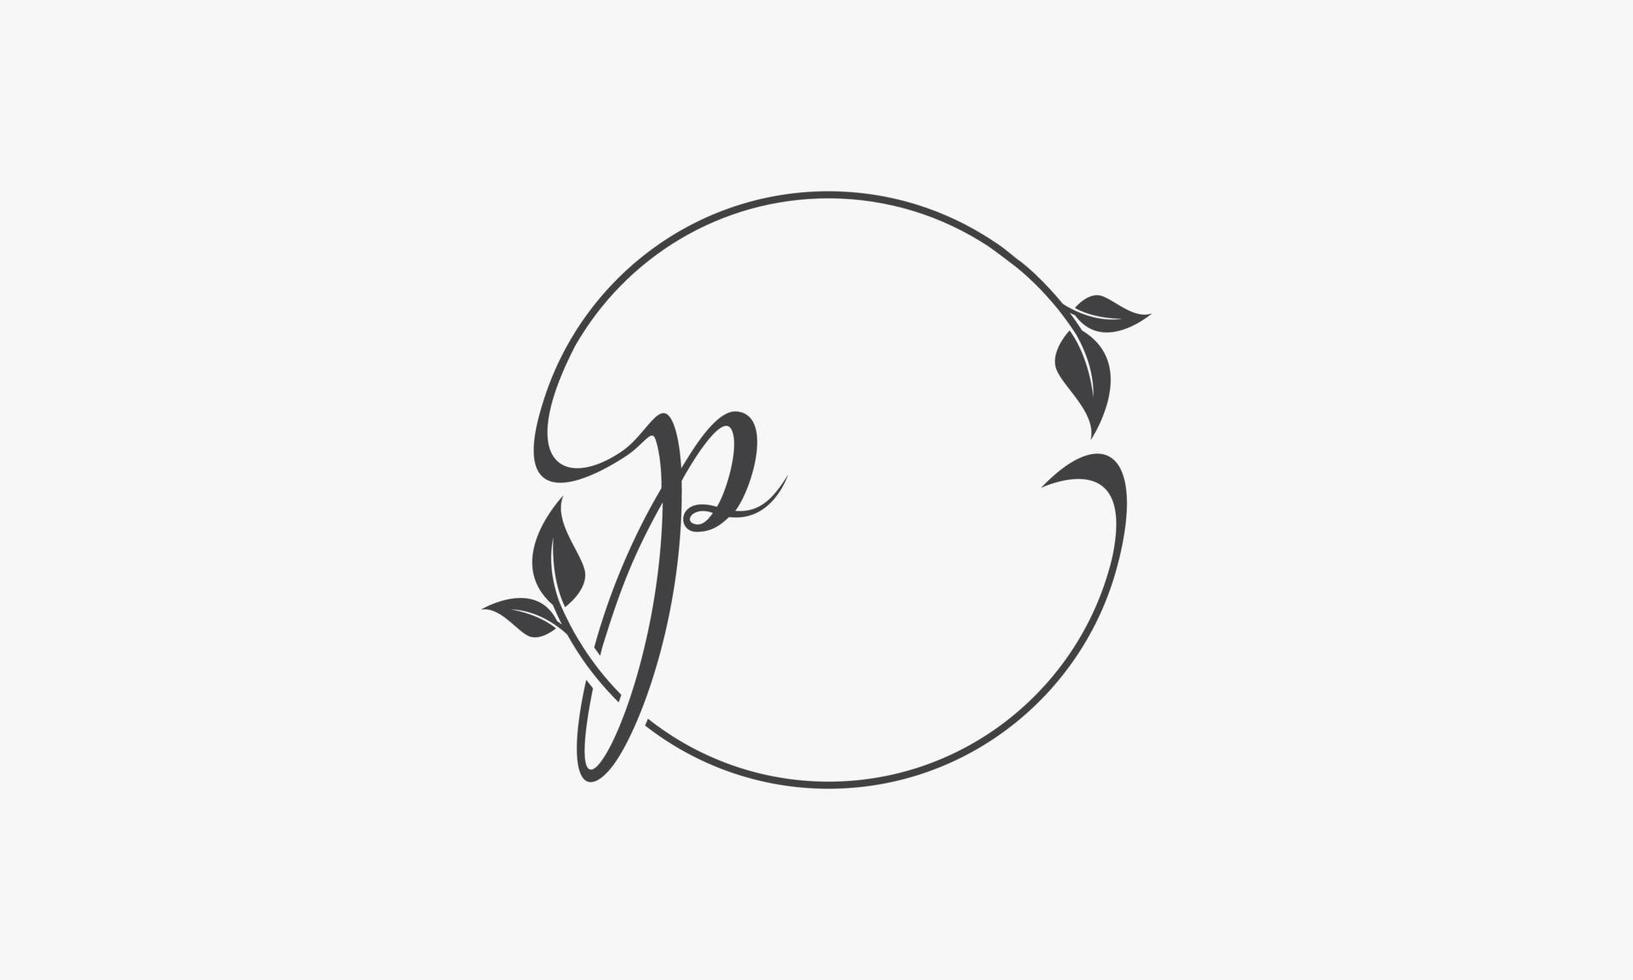 P letter handwriting circle leaf graphic logo concept. vector